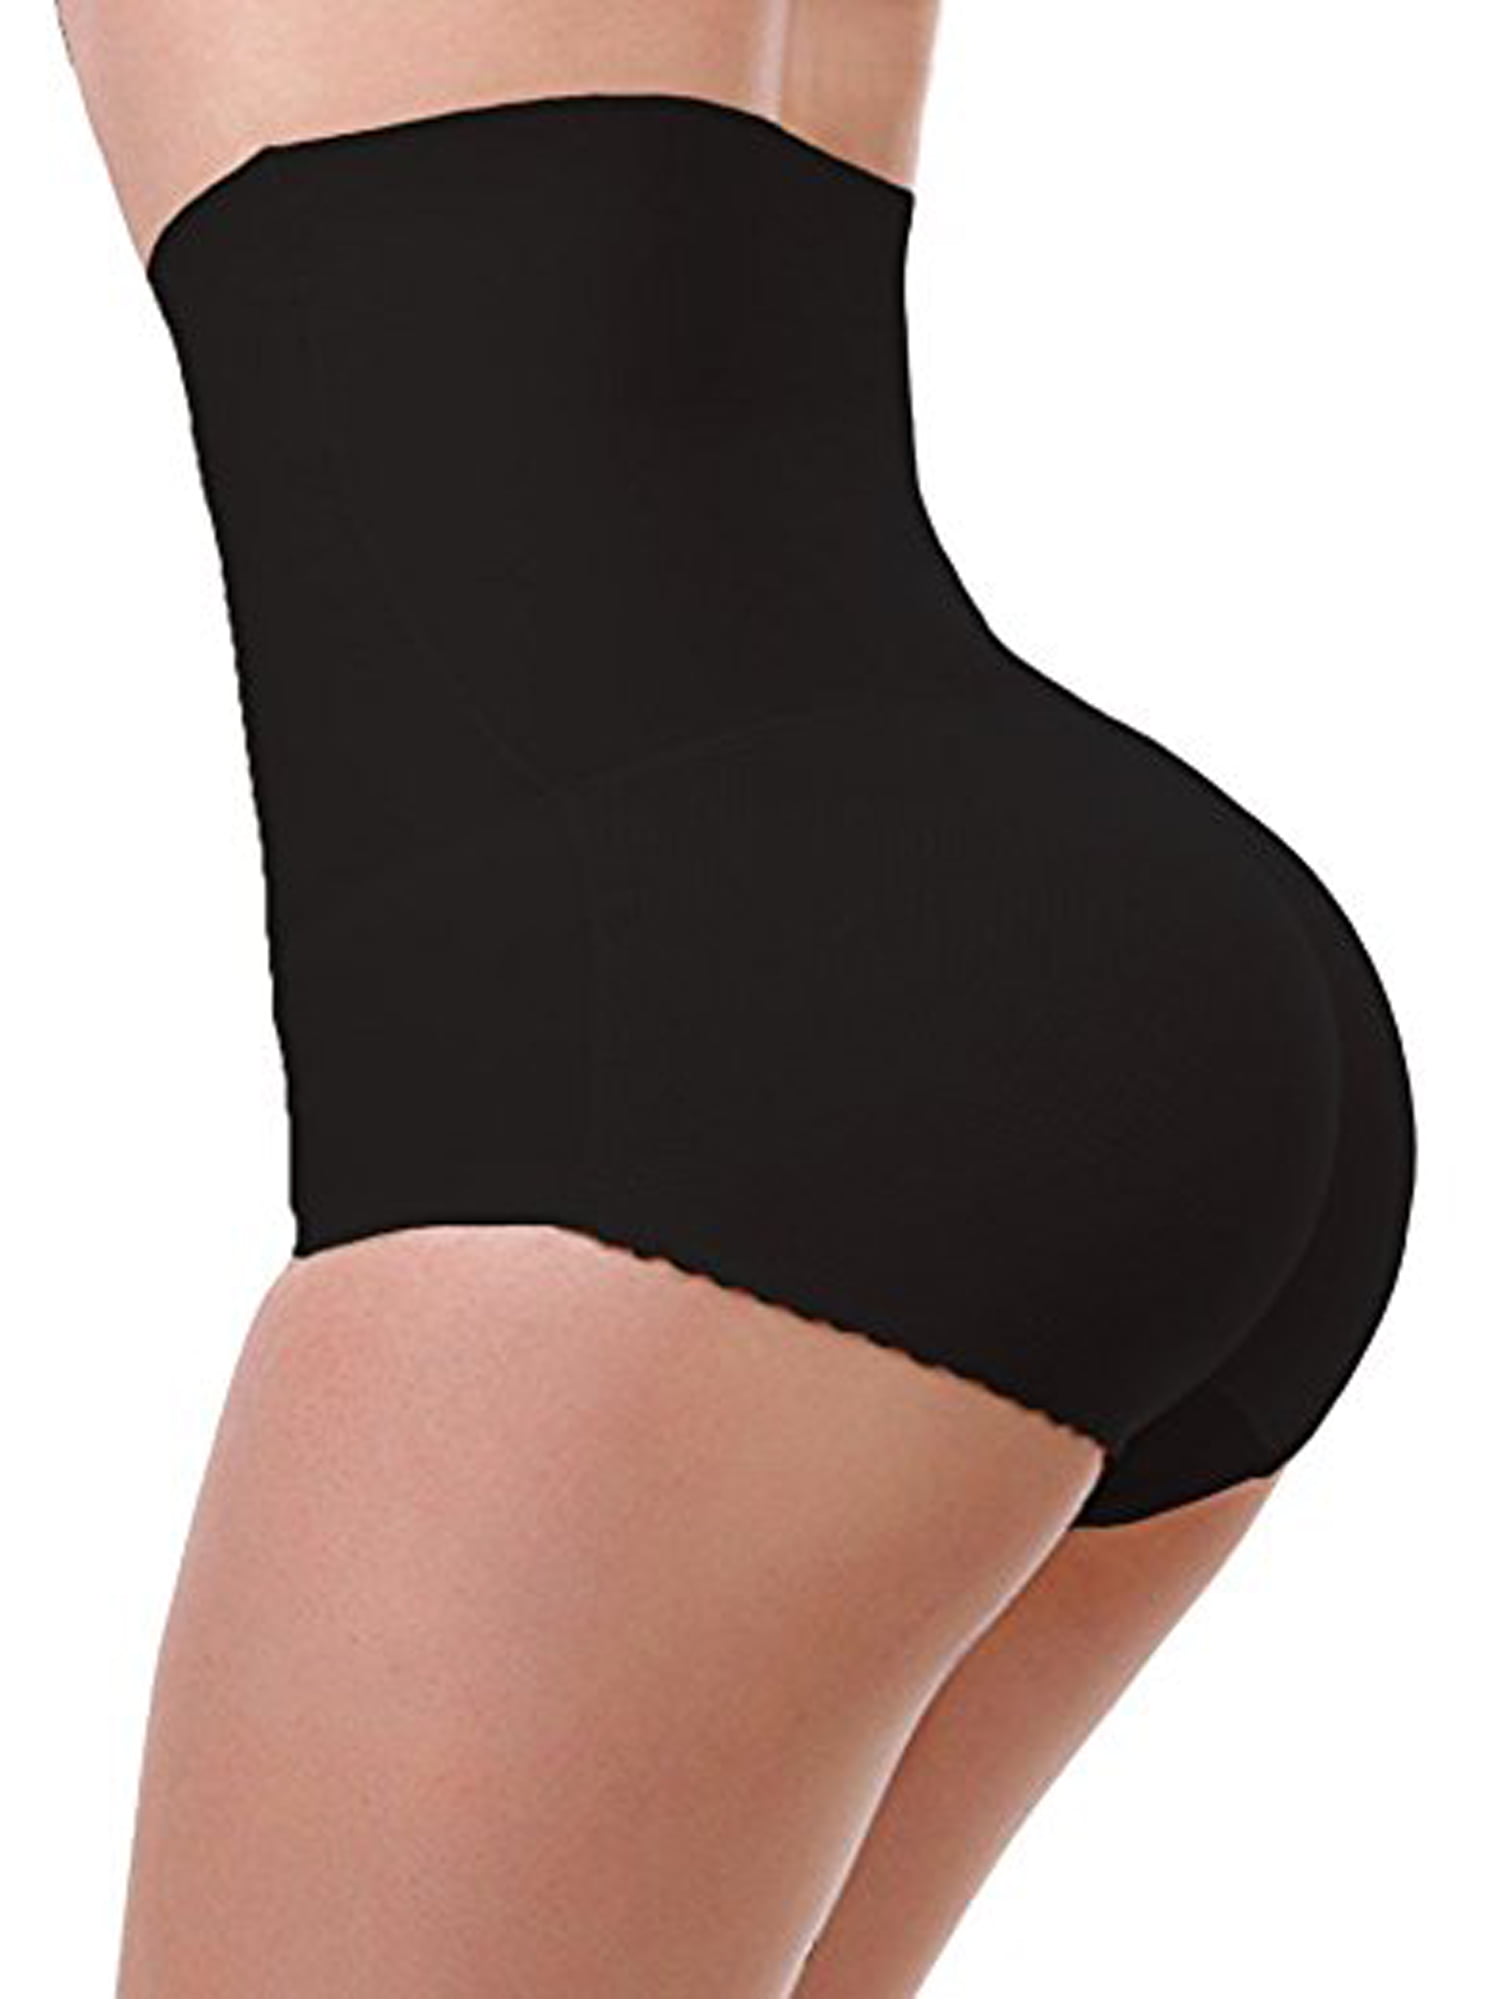 Leapair Leapair Women S Ultra Firm Control High Waist Tummy Slimming Padded Butt Lifter